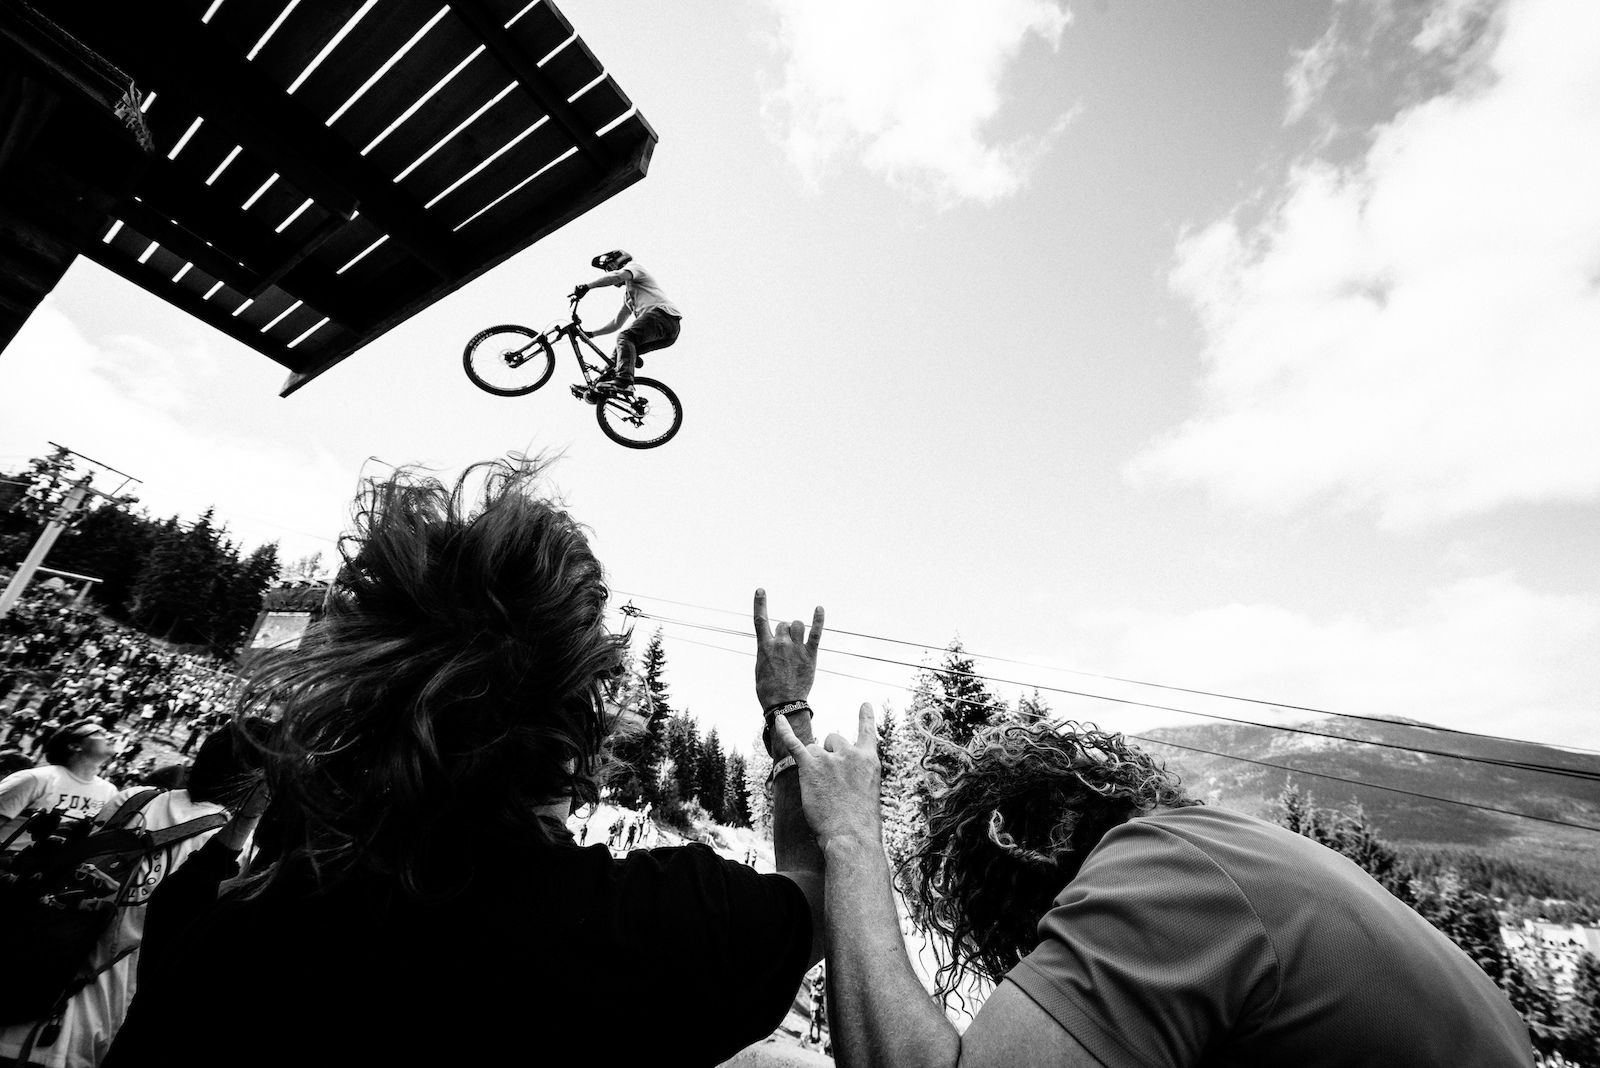 KC Dean and Kelly rock on Gregg Watts during Crankworx 2015.